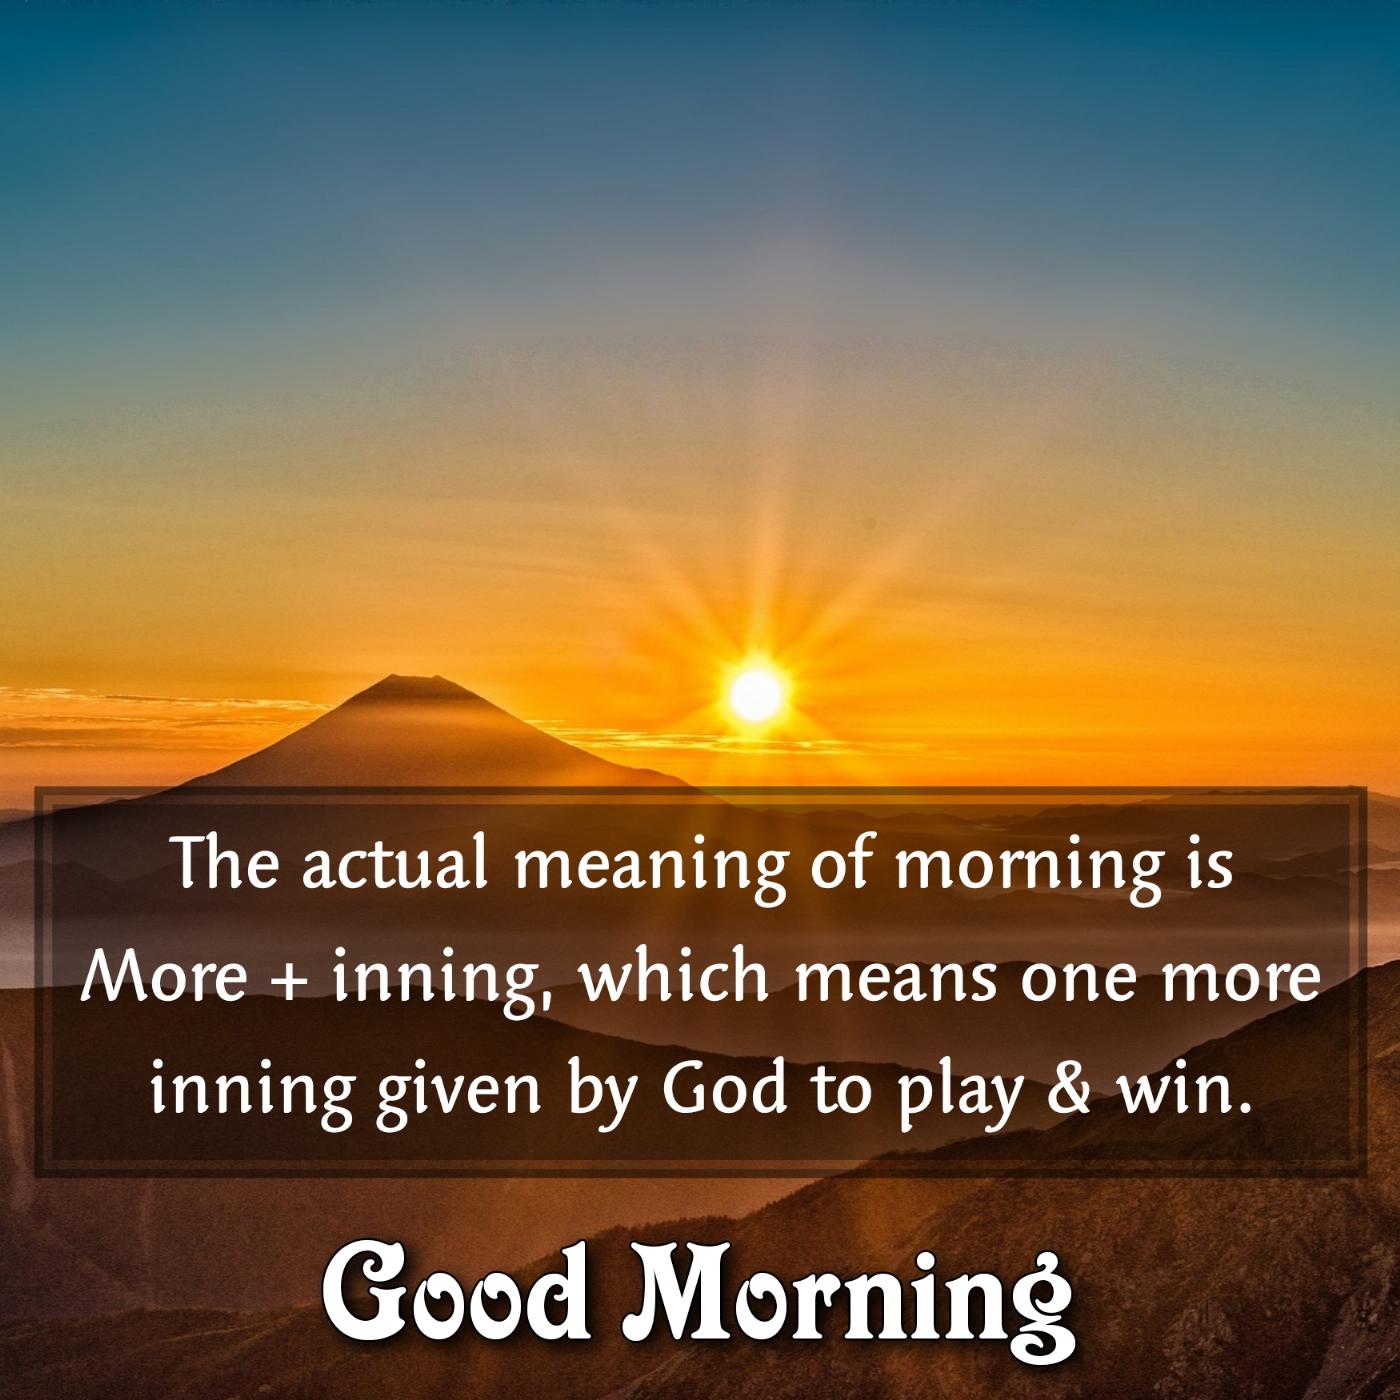 The actual meaning of morning is More inning